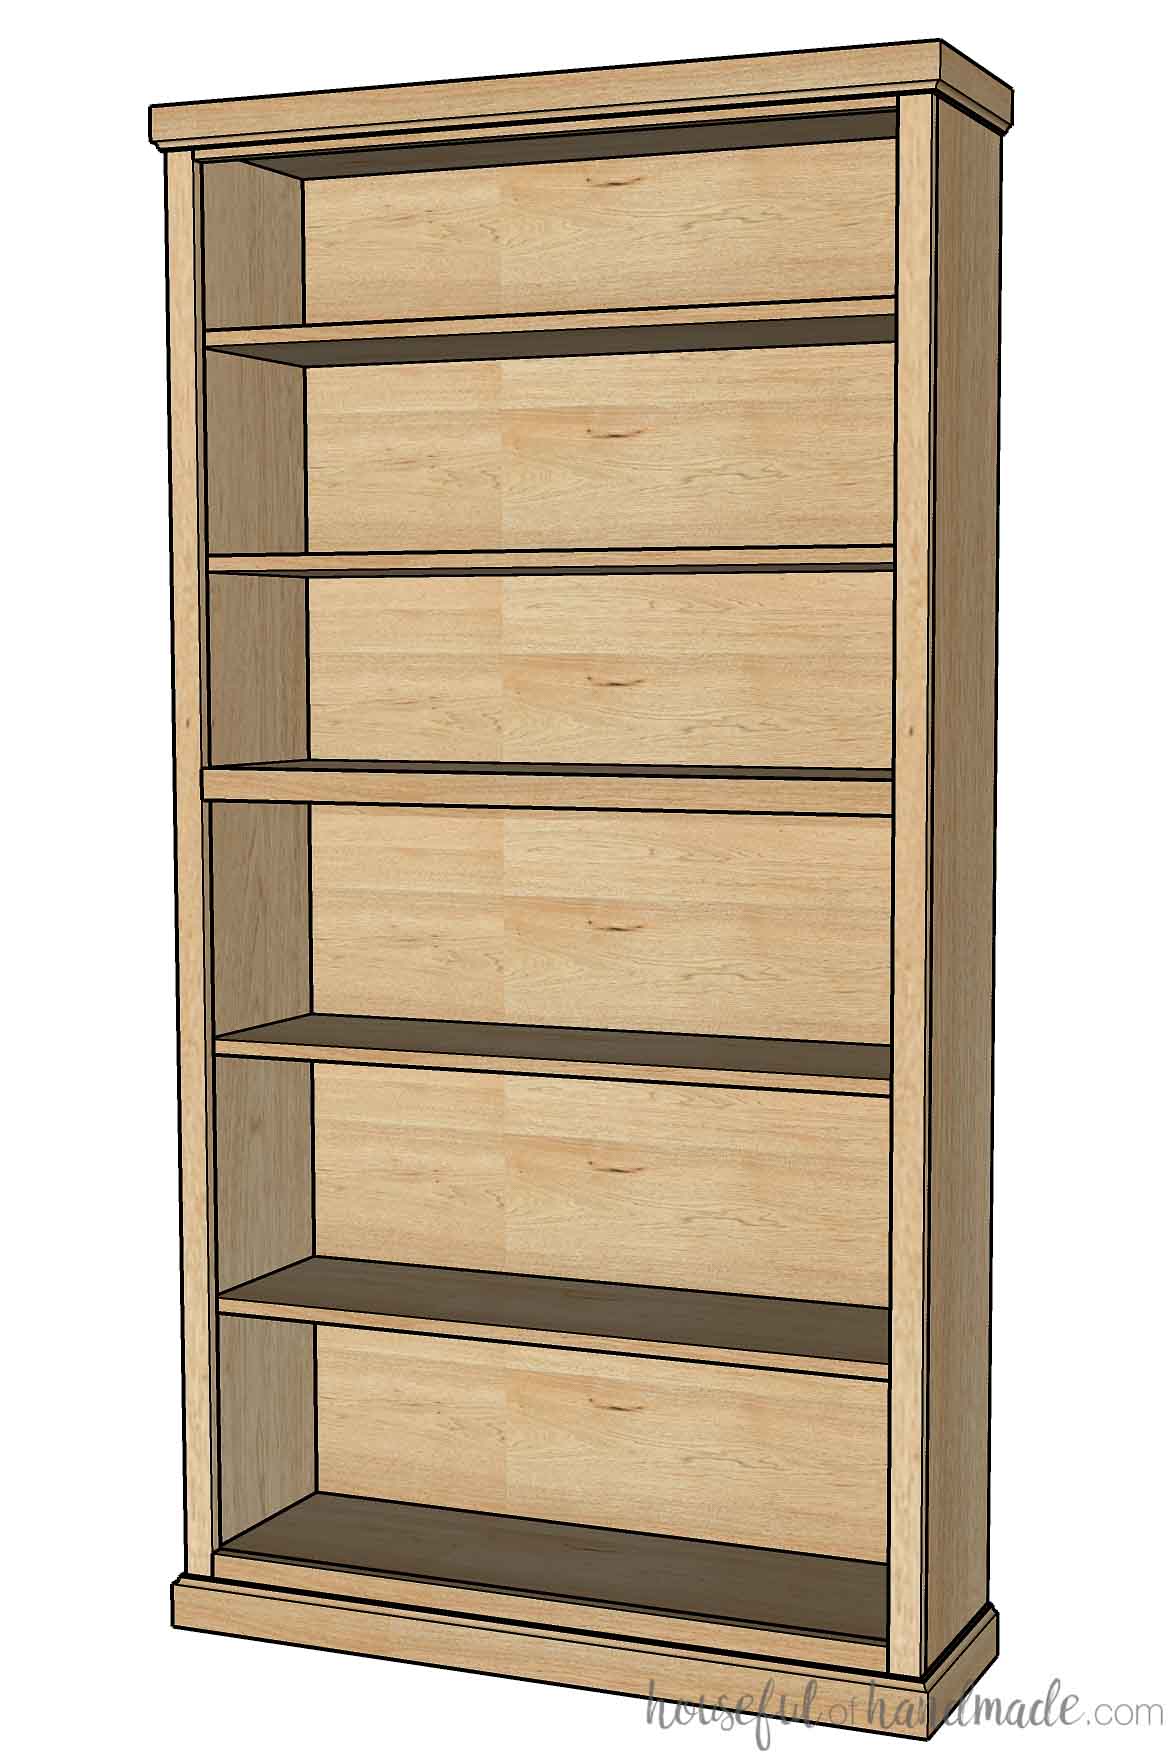 3D build drawing of a tall bookcase with face frame and adjustable shelves. 